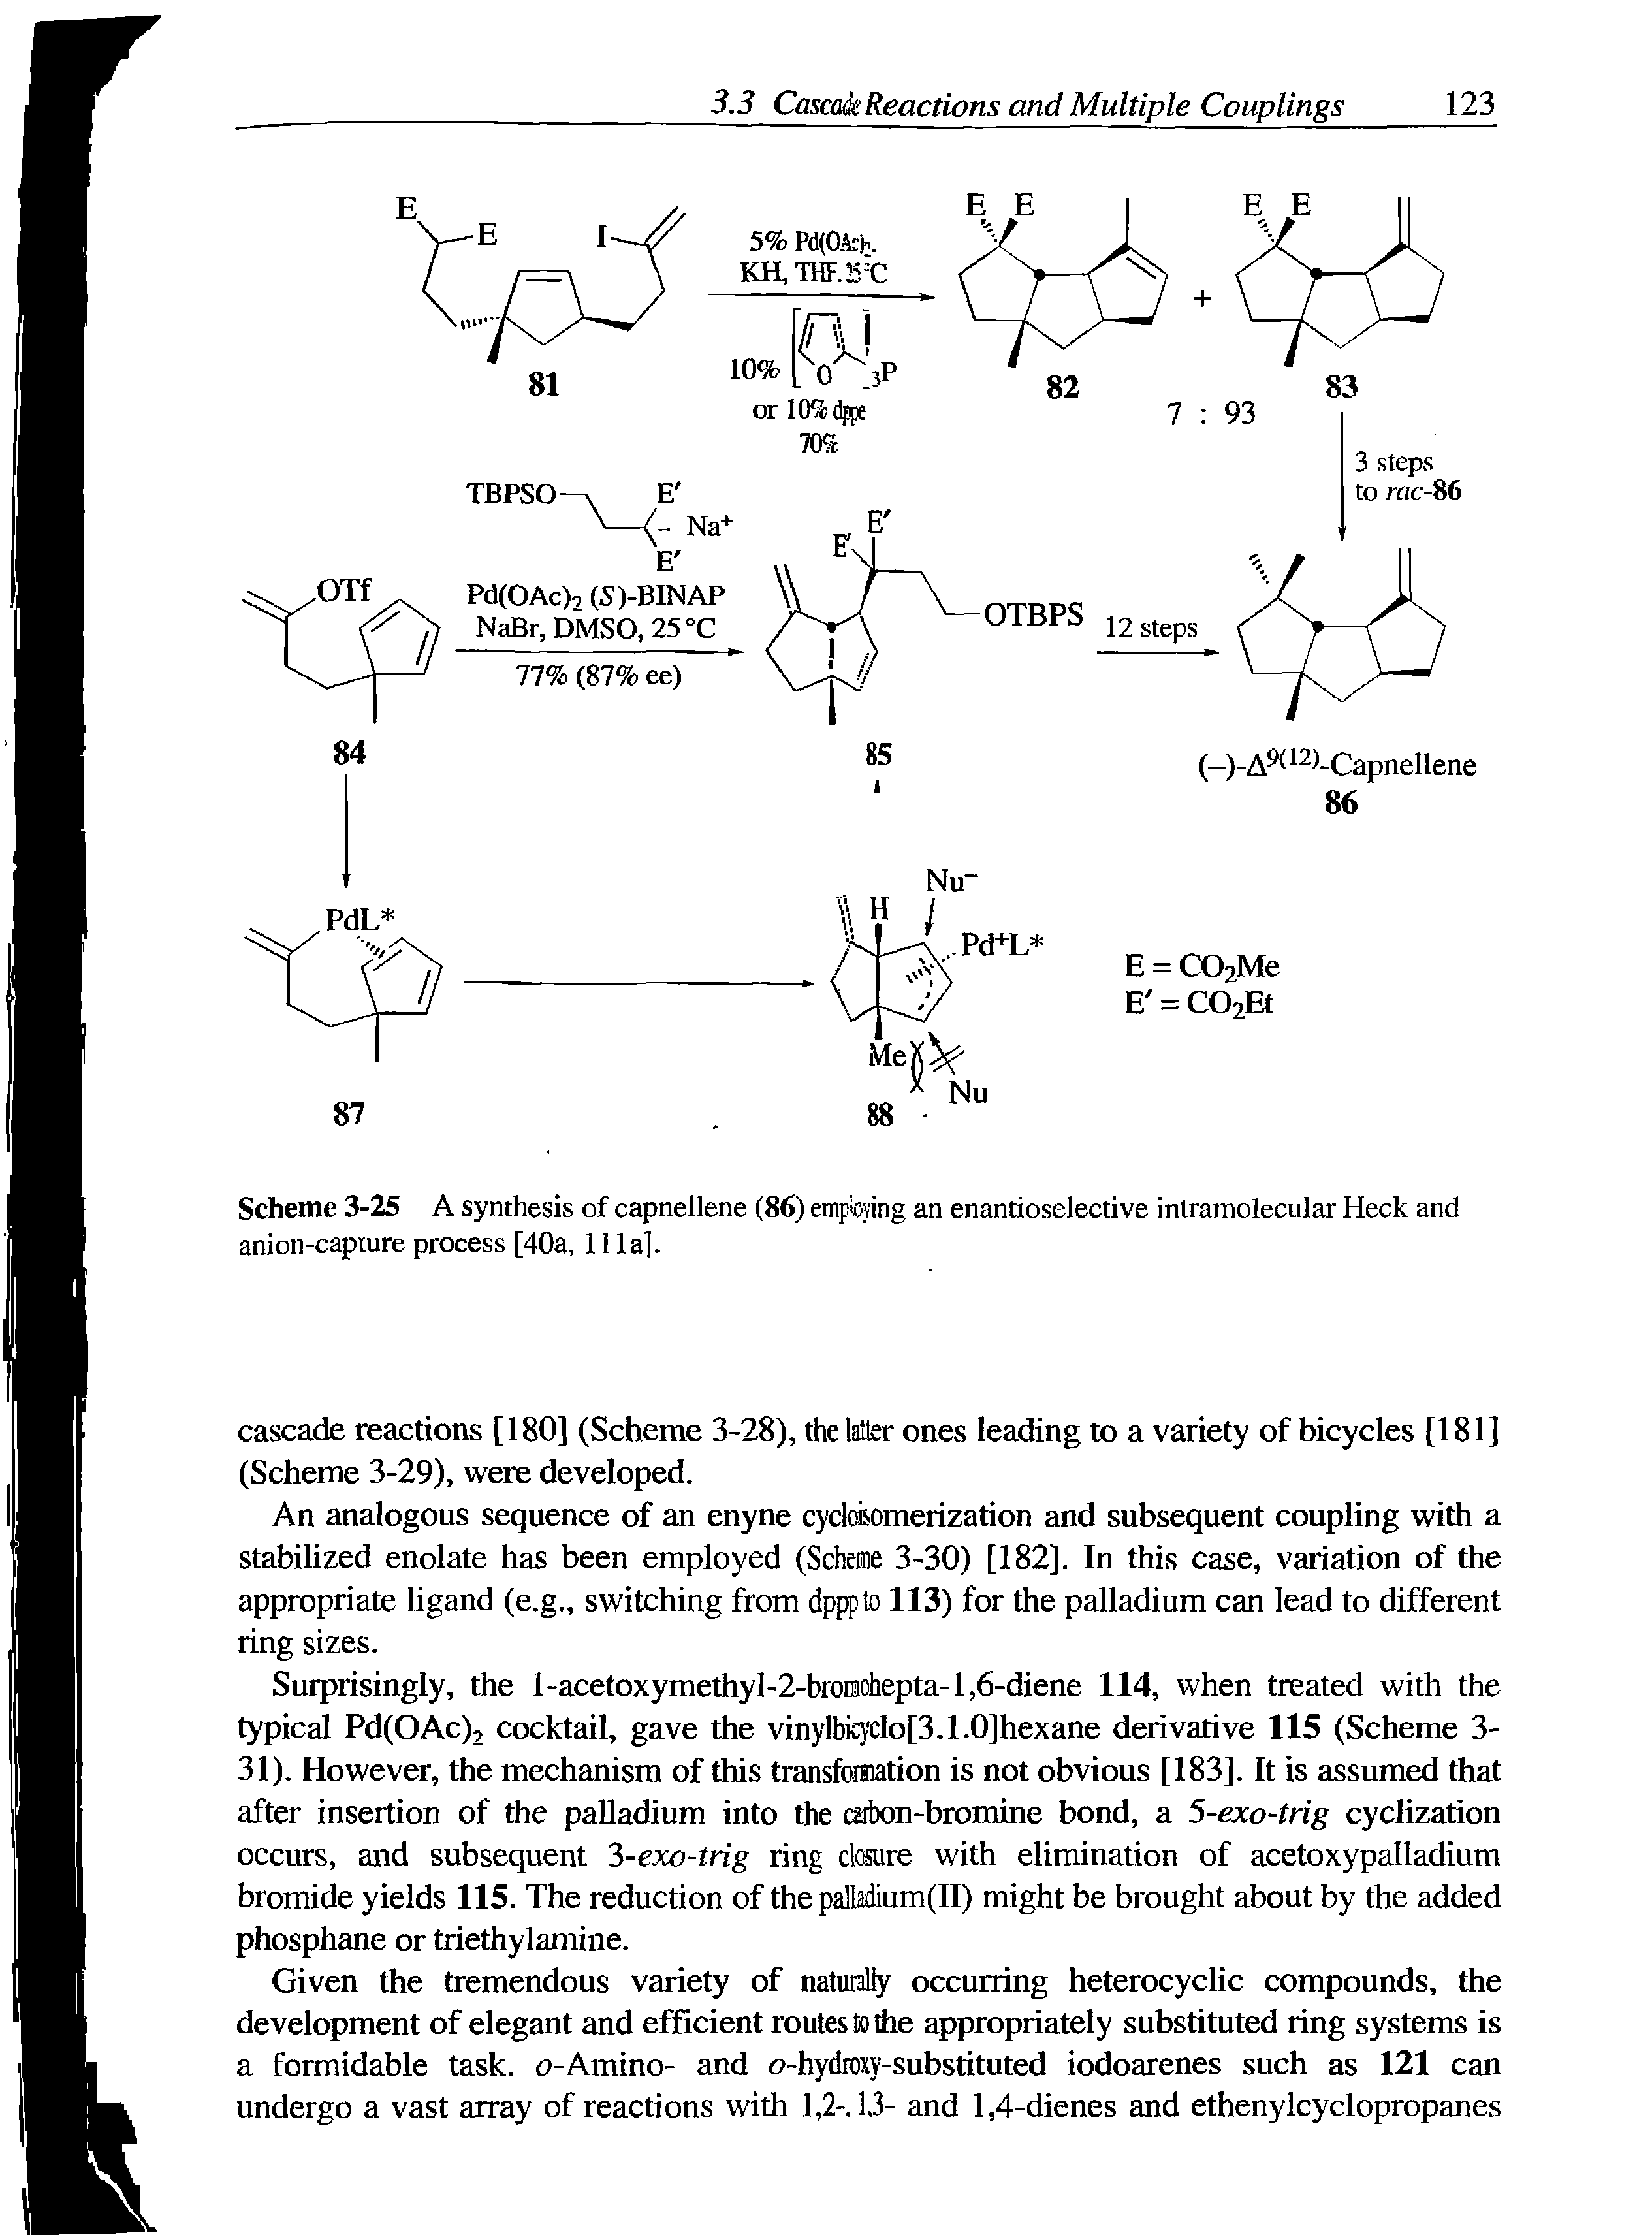 Scheme 3-25 A synthesis of capnellene (86) empioying an enantioselective intramolecular Heck and anion-capture process [40a, 11 la].